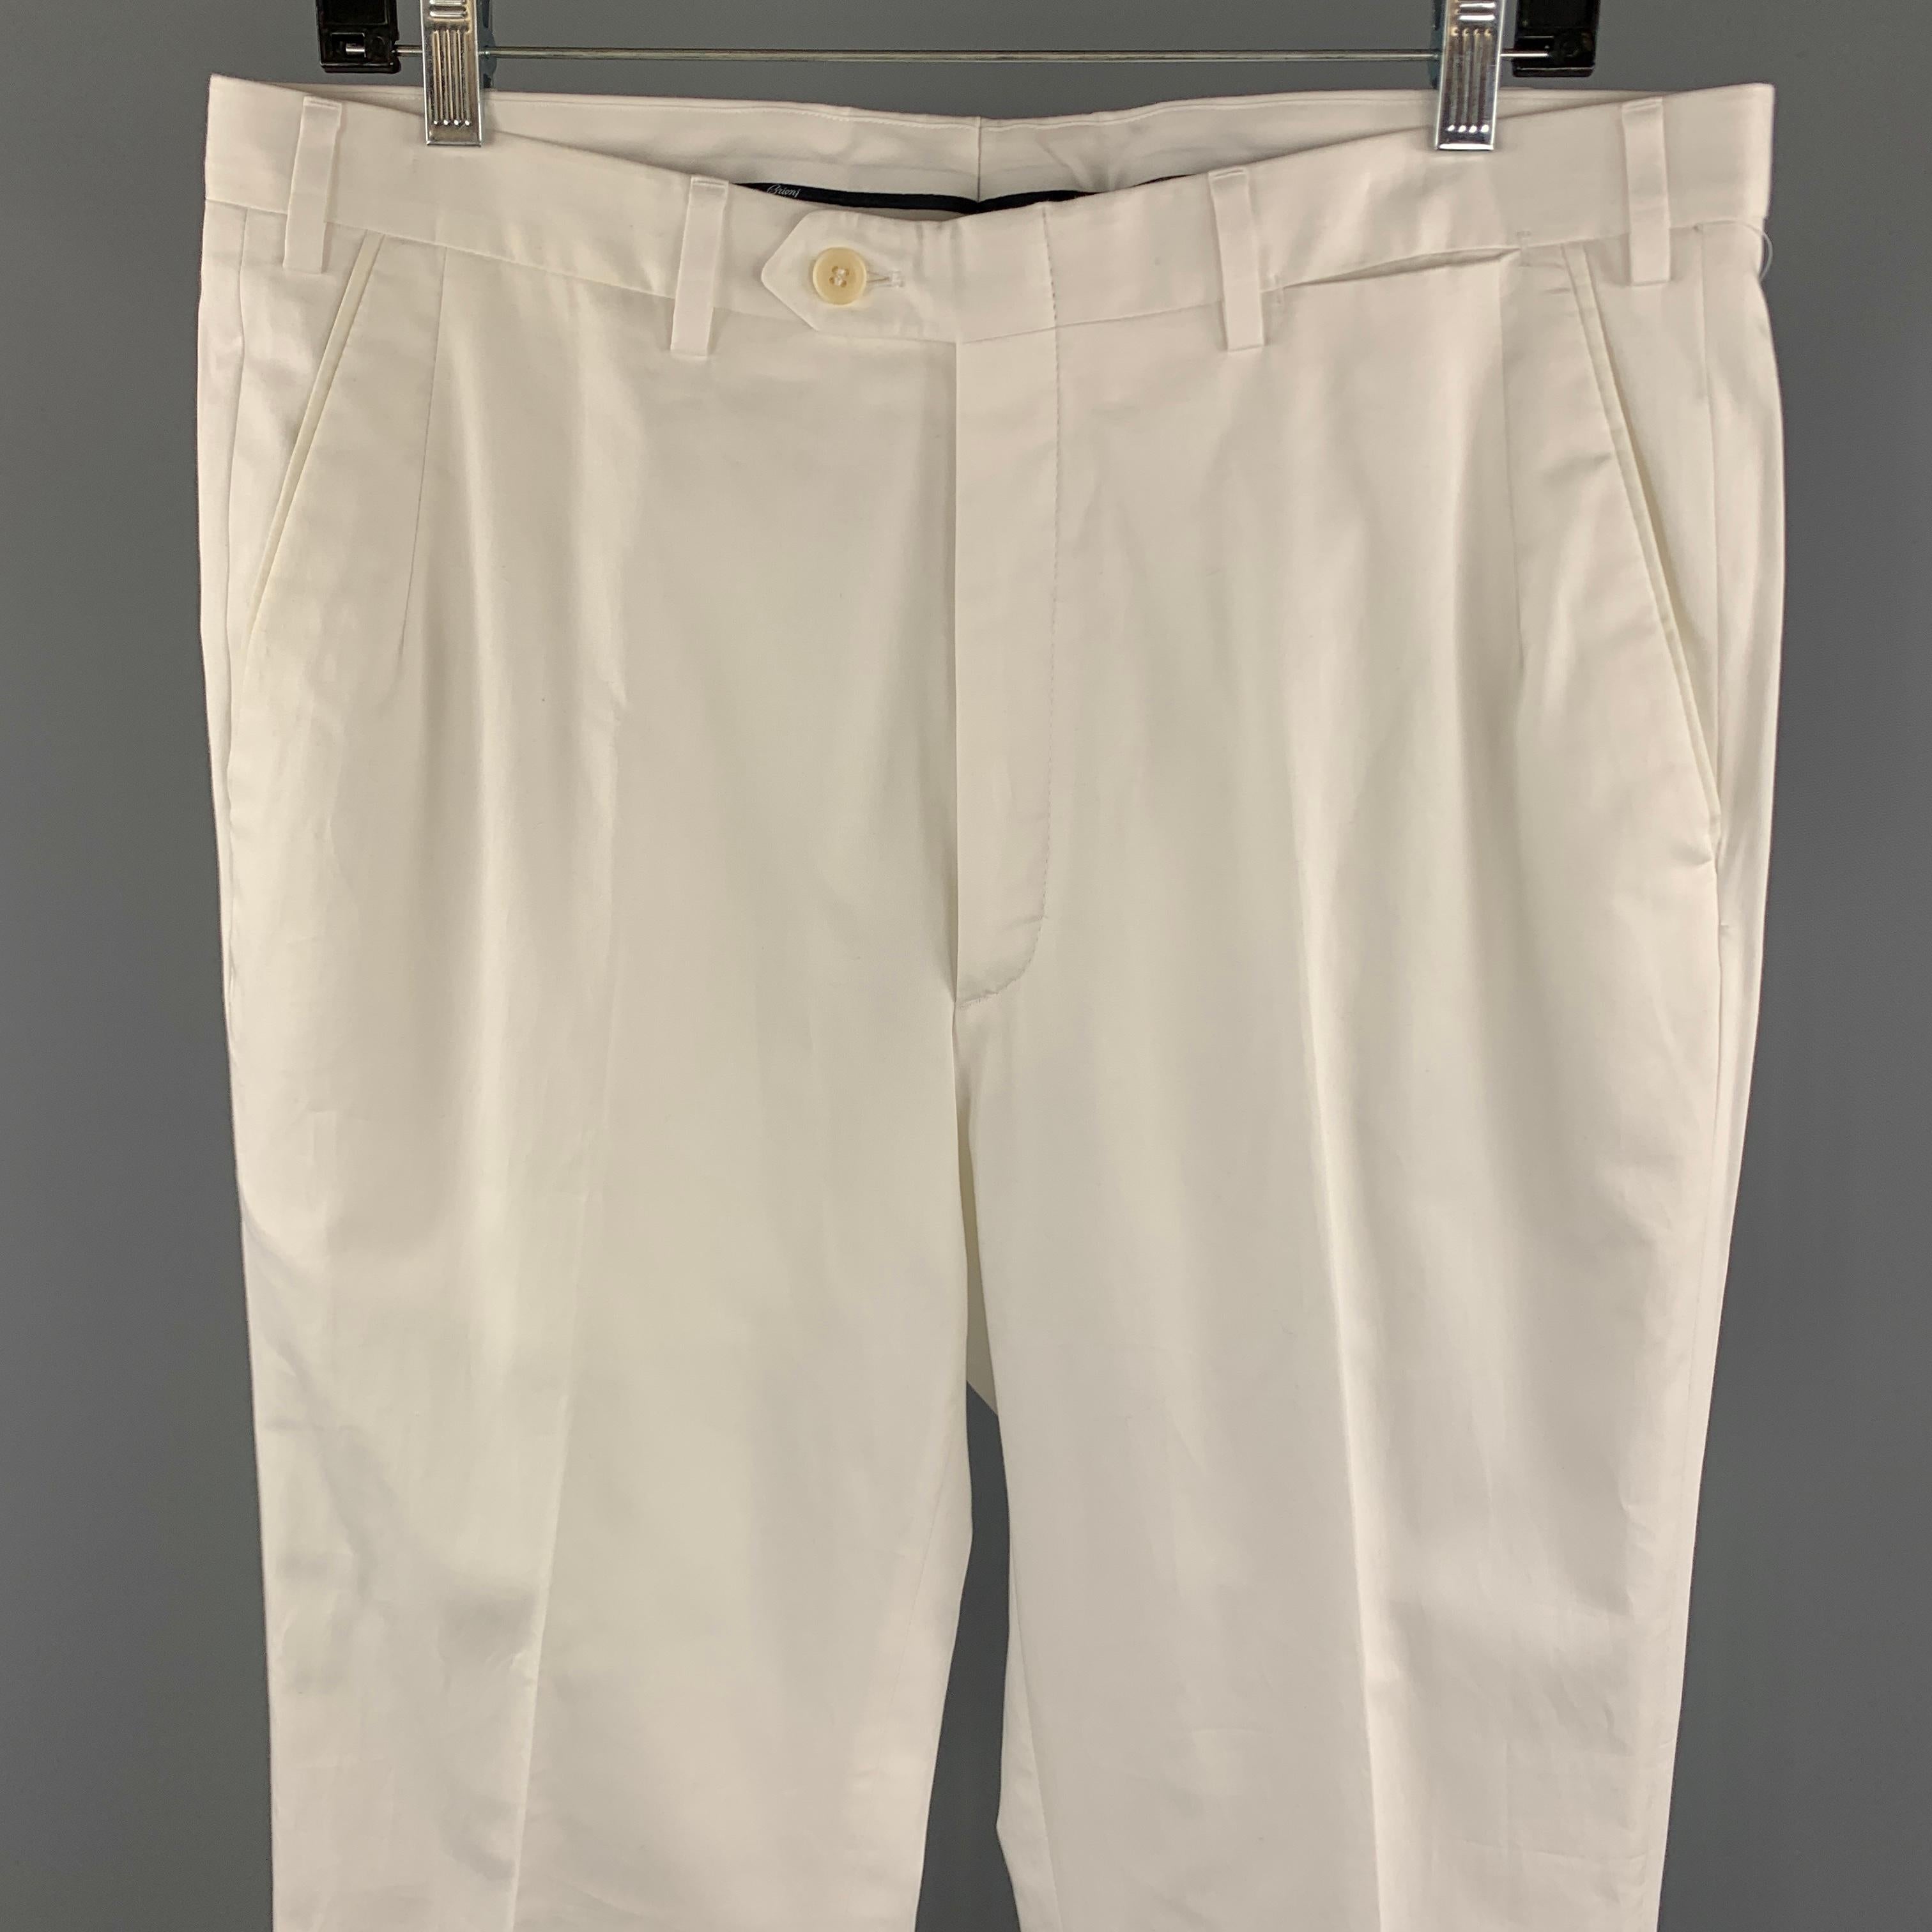 BRIONI Dress Pants comes in a white cotton material, with a front tab, seam and zip pockets, cuffed, zip fly. Made in Italy. 

Excellent Pre-Owned Condition.
Marked: 34 R

Measurements:

Waist: 35 in. 
Rise: 12 in. 
Inseam: 31.5 in.